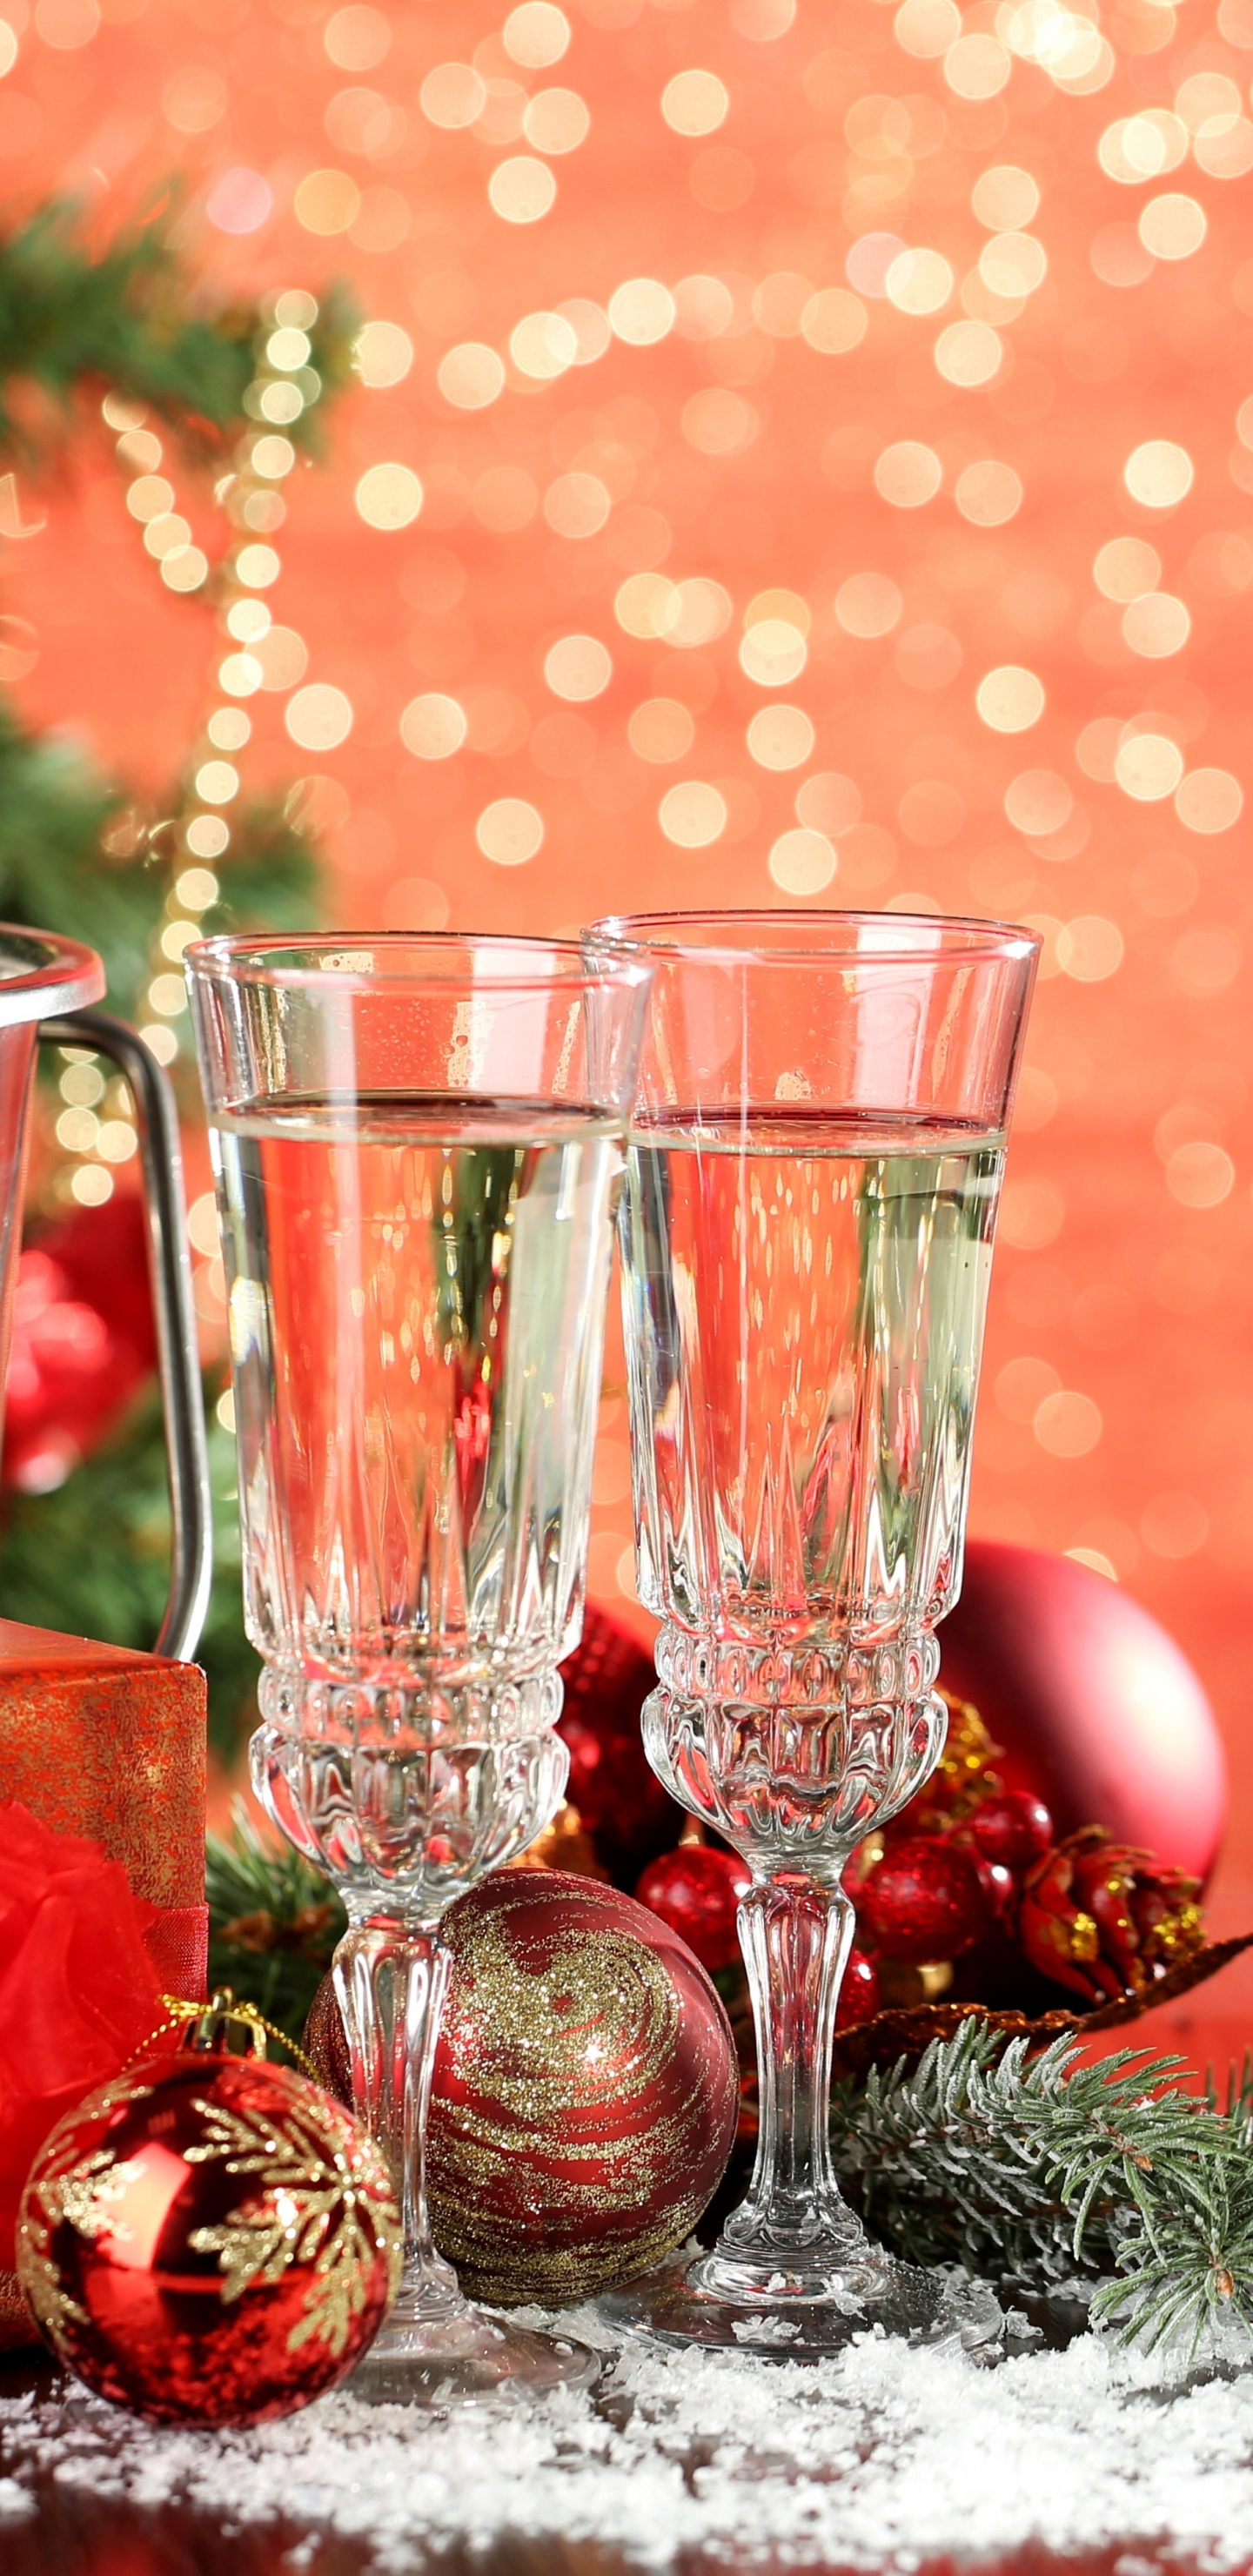 Champagne, New Year, Christmas Ornament, Christmas Decoration, Christmas. Wallpaper in 1440x2960 Resolution